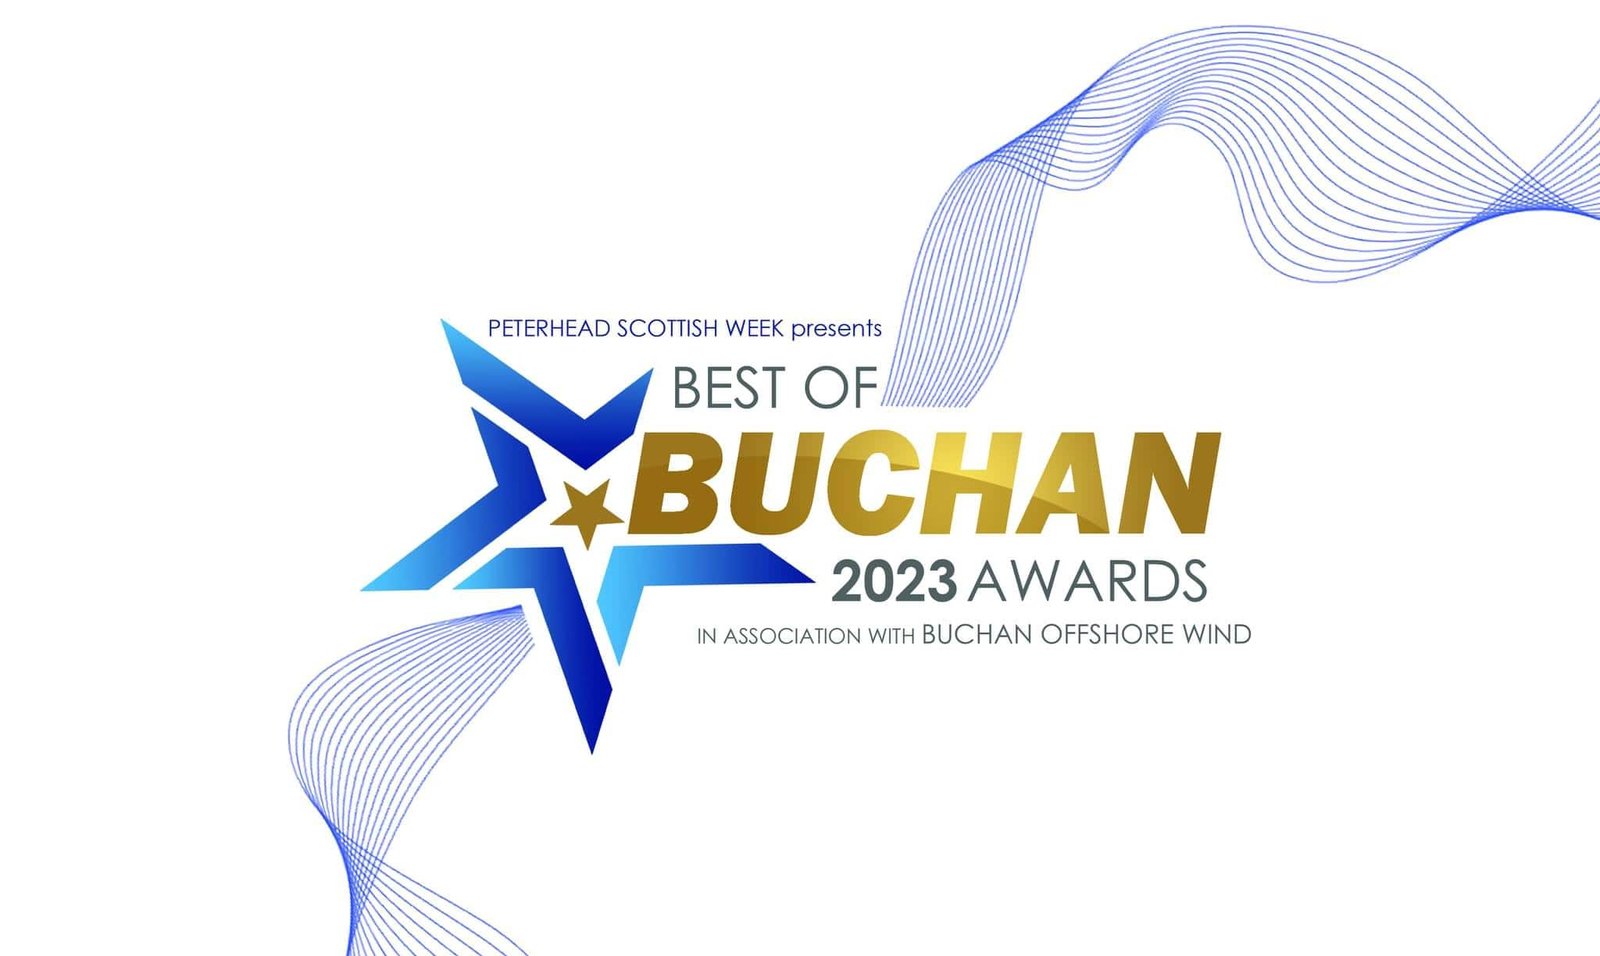 Best of Buchan Awards are back for 2023